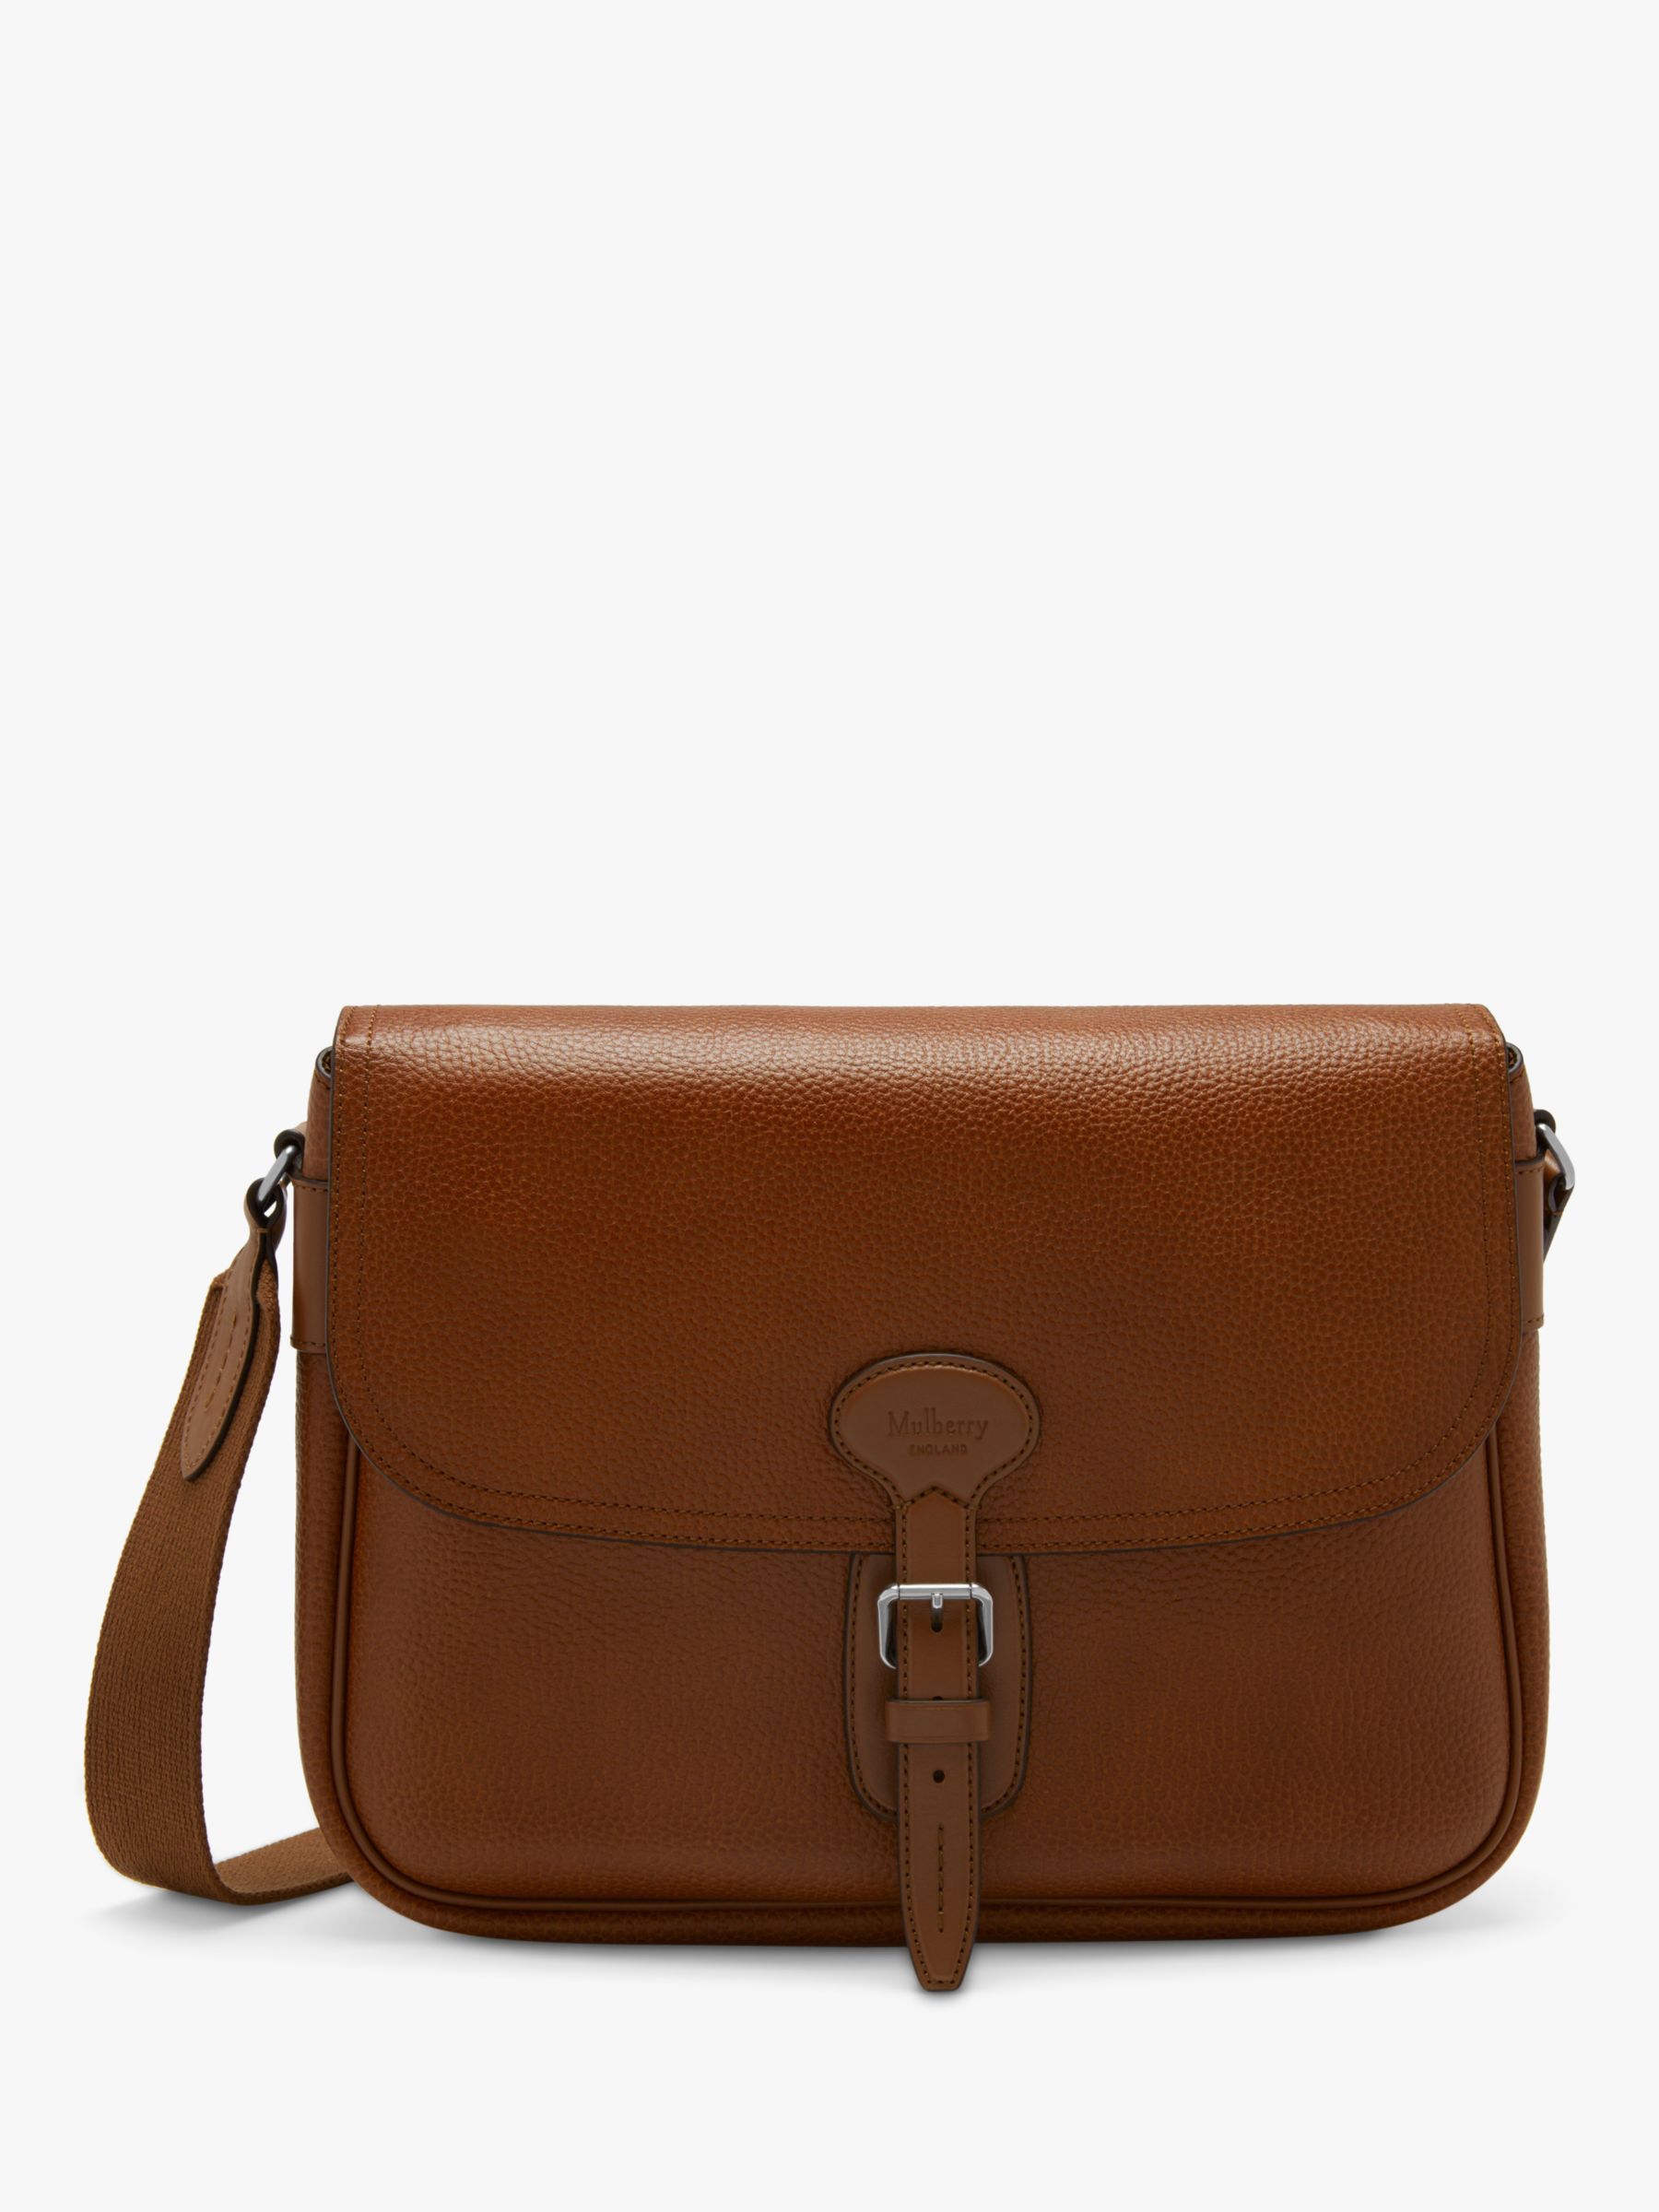 Mulberry Small Heritage Leather Messenger Bag, Oak at John Lewis & Partners